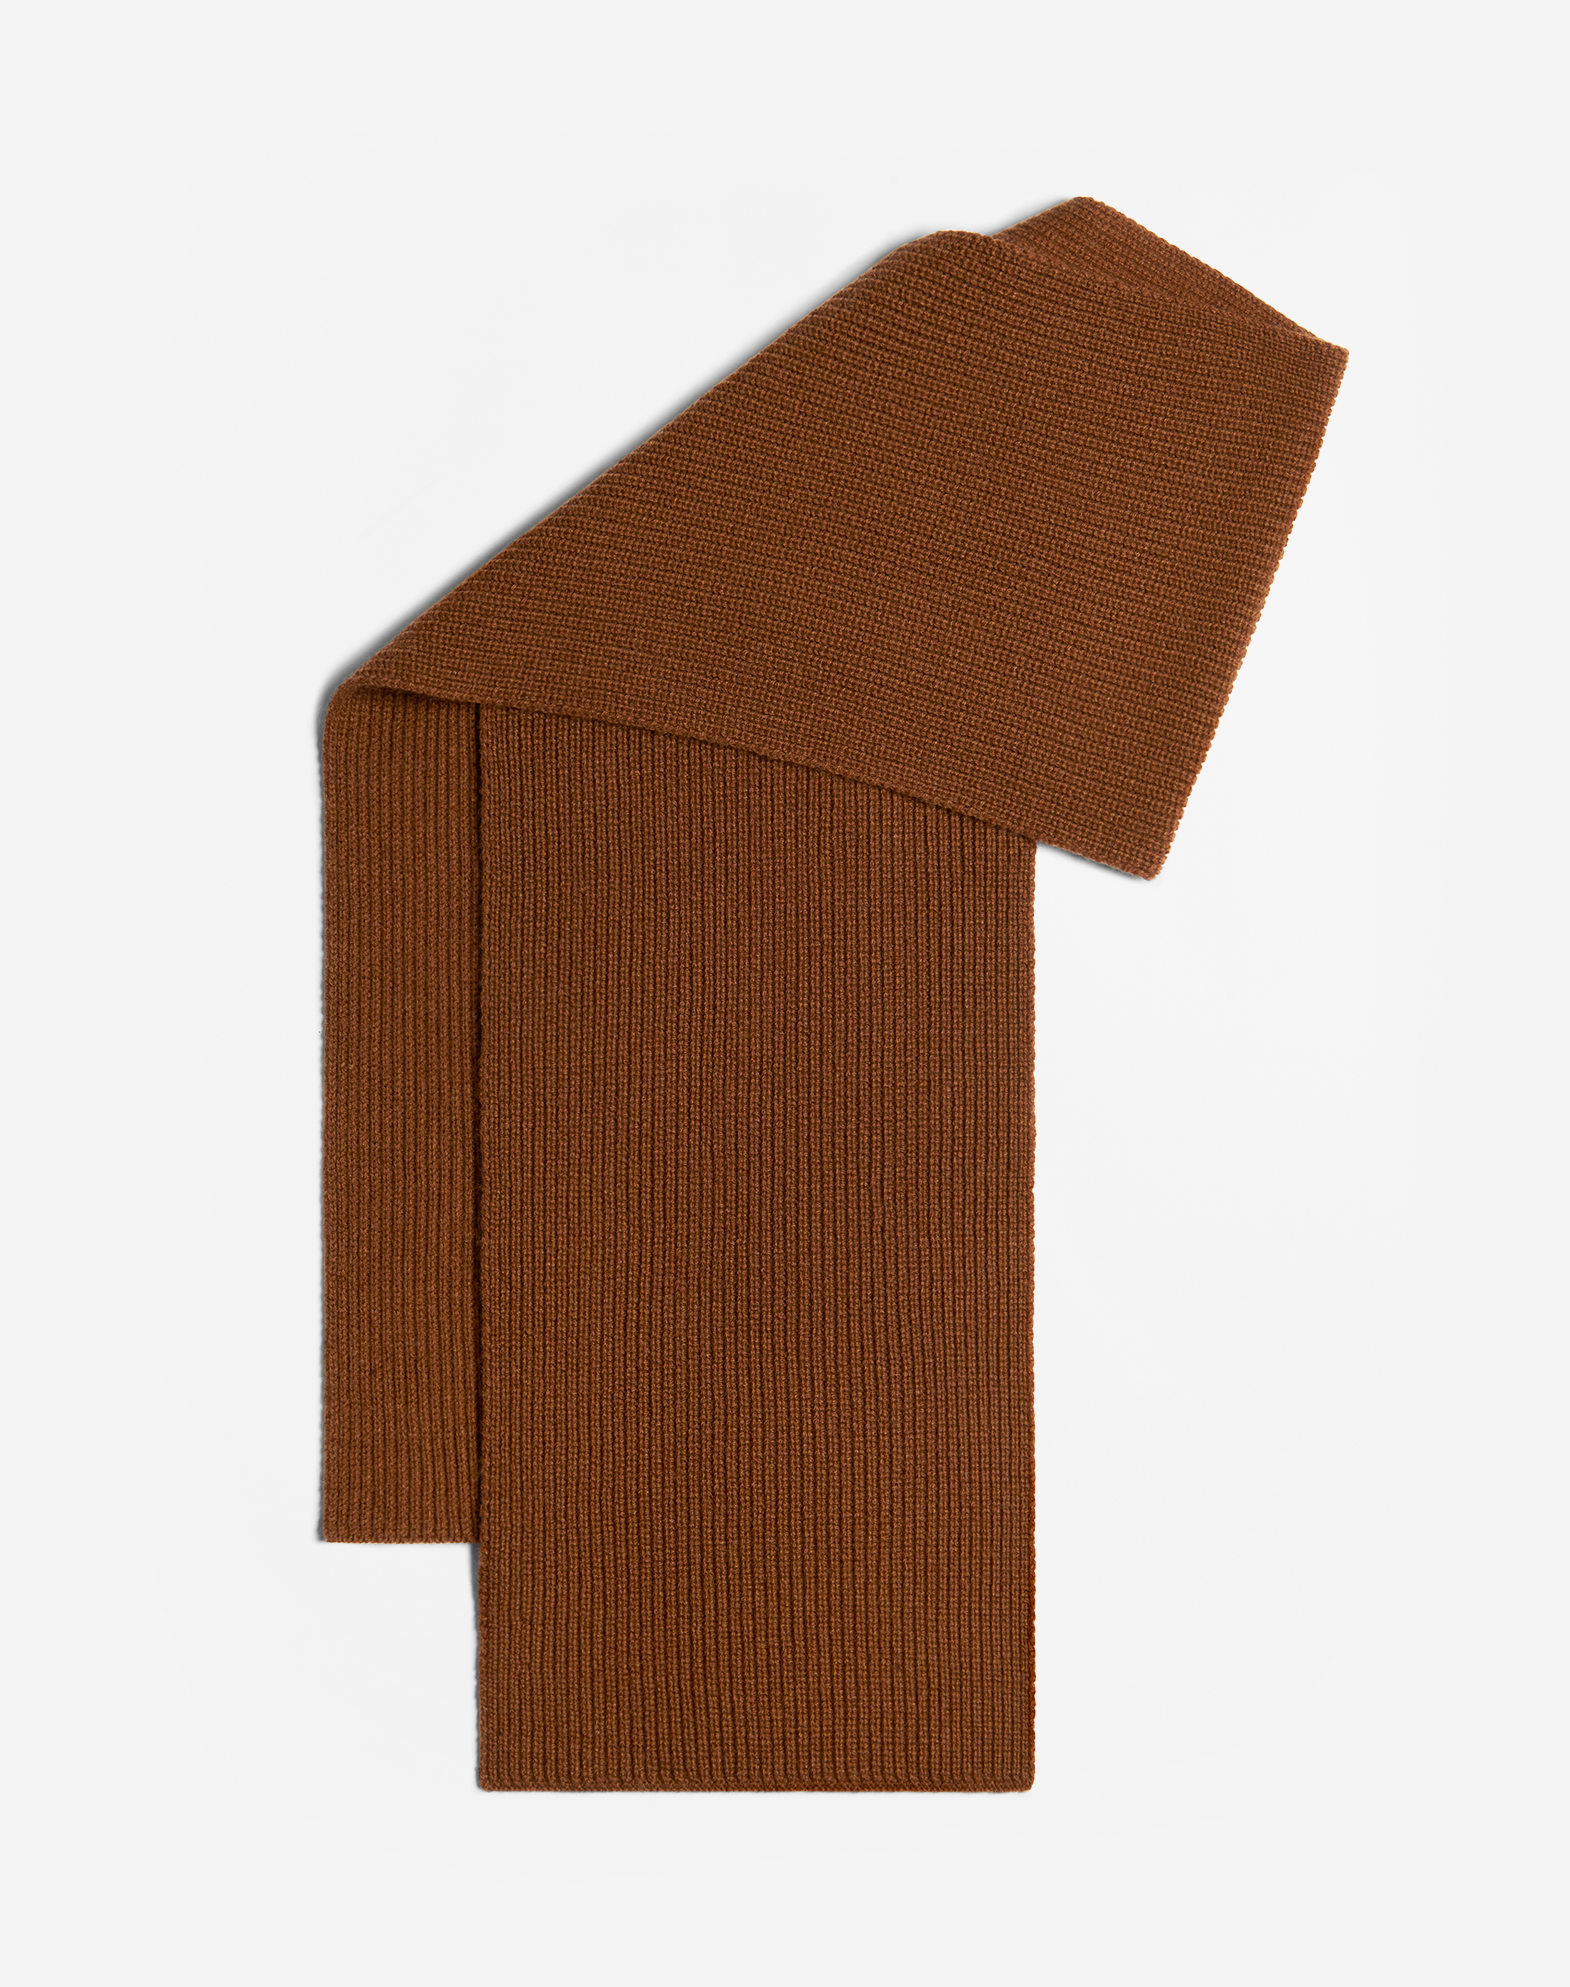 Dunhill Luxury Men's Scarves